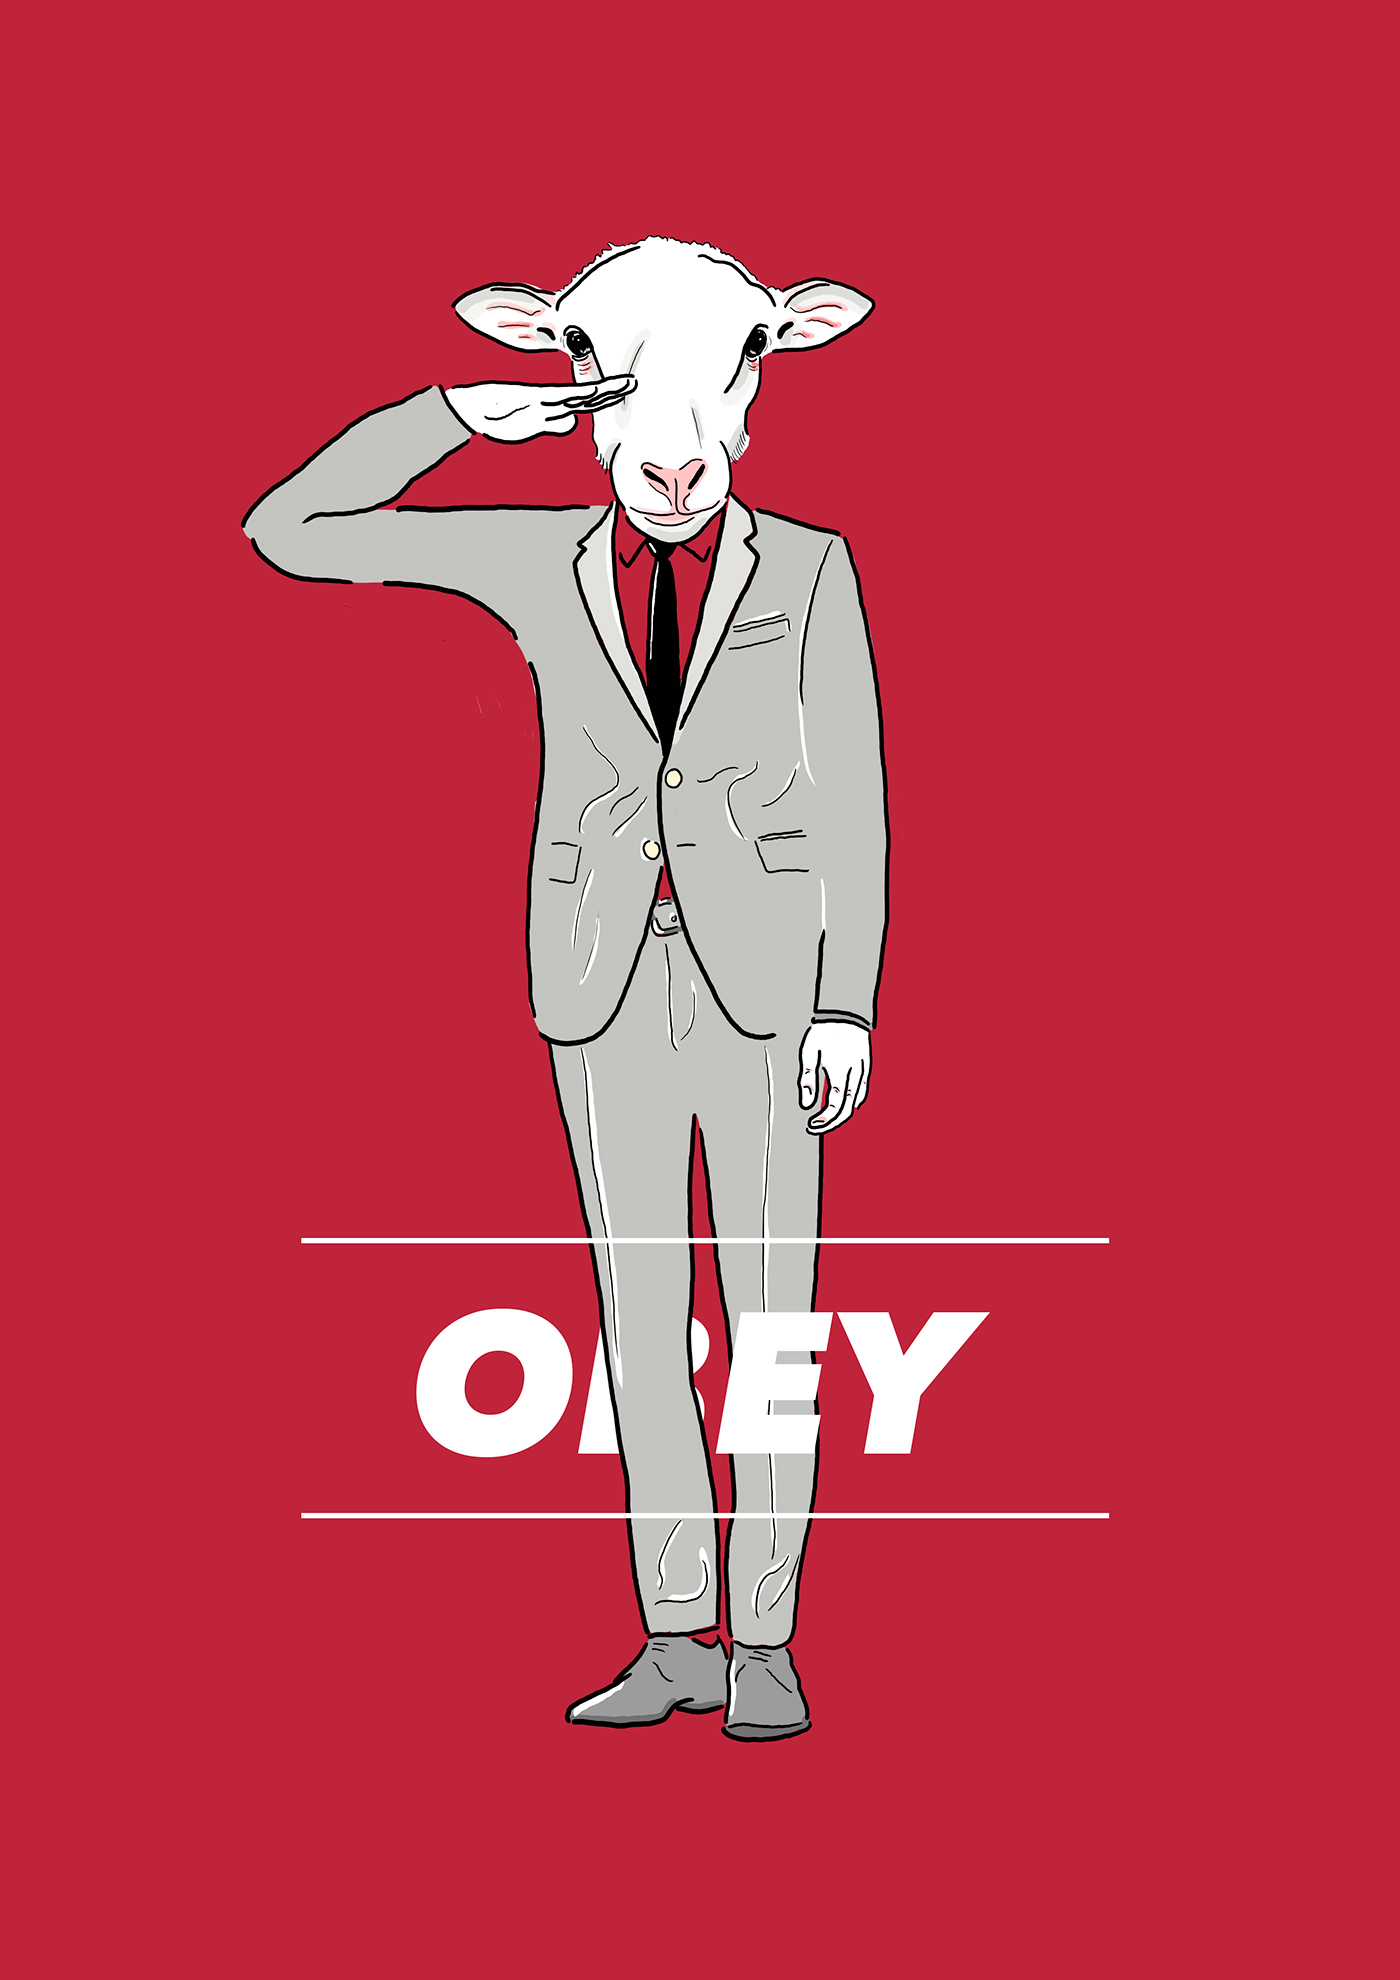 Sheeple Work  Reproduce society OBEY comsume money sheep